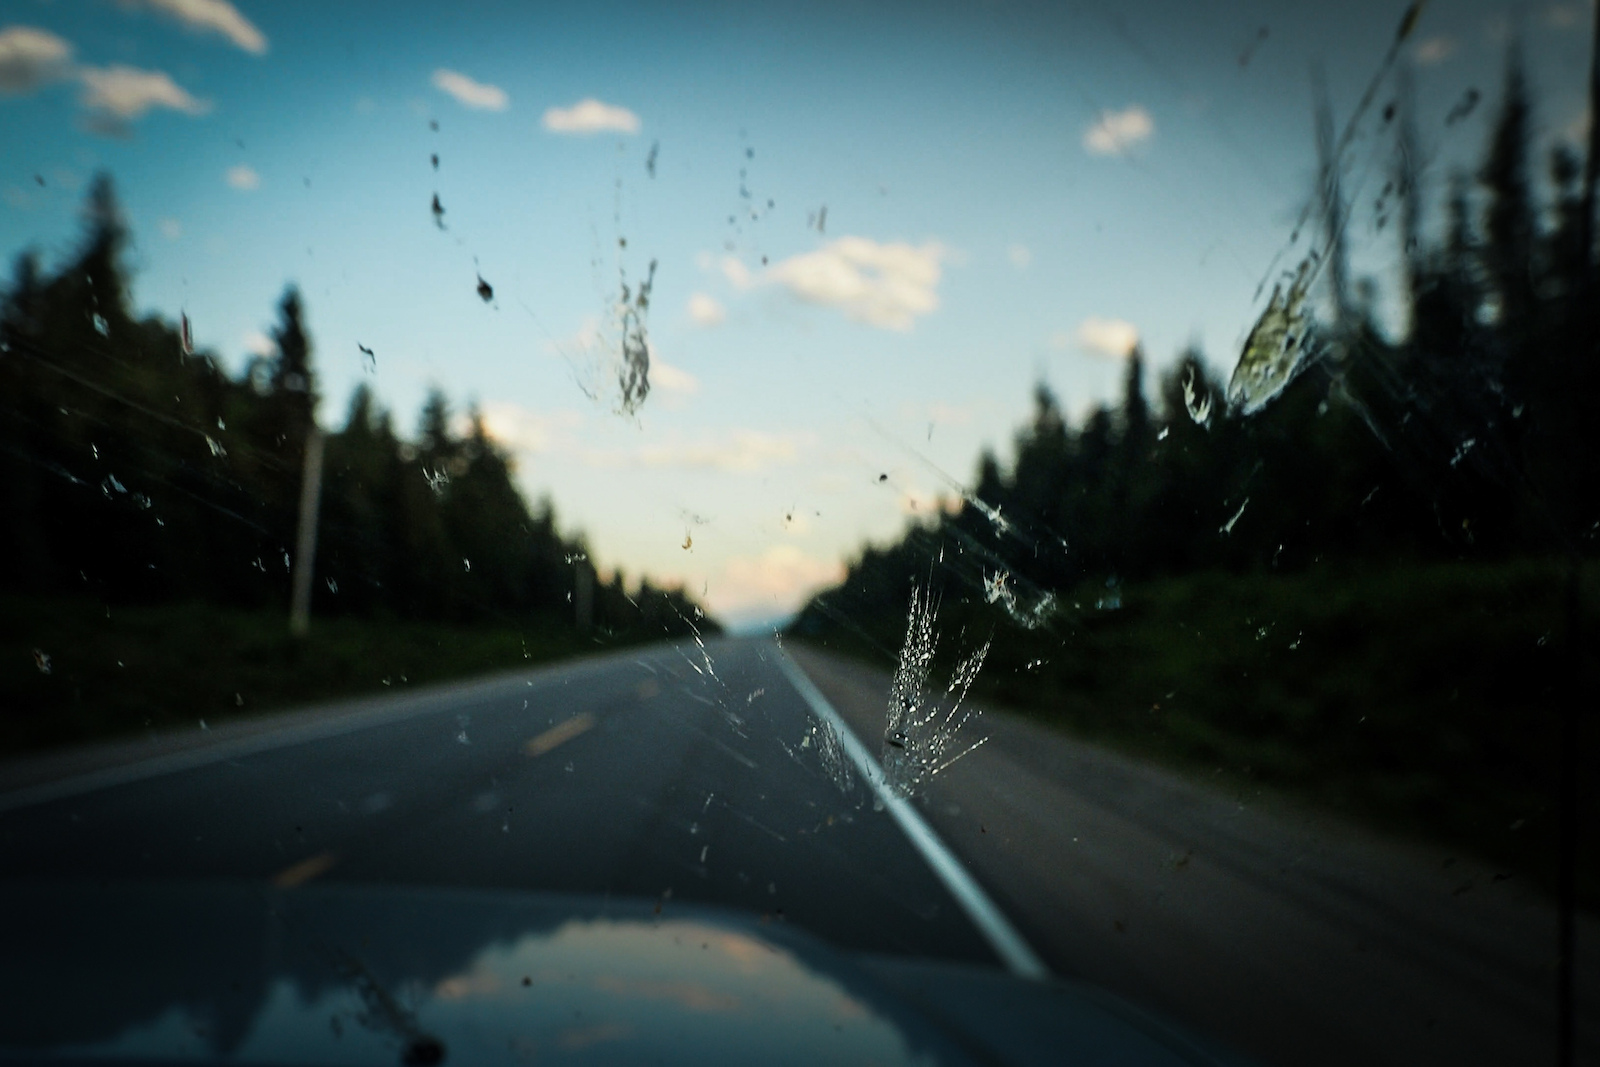 Lots of windshield hitchhikers on this road trip.